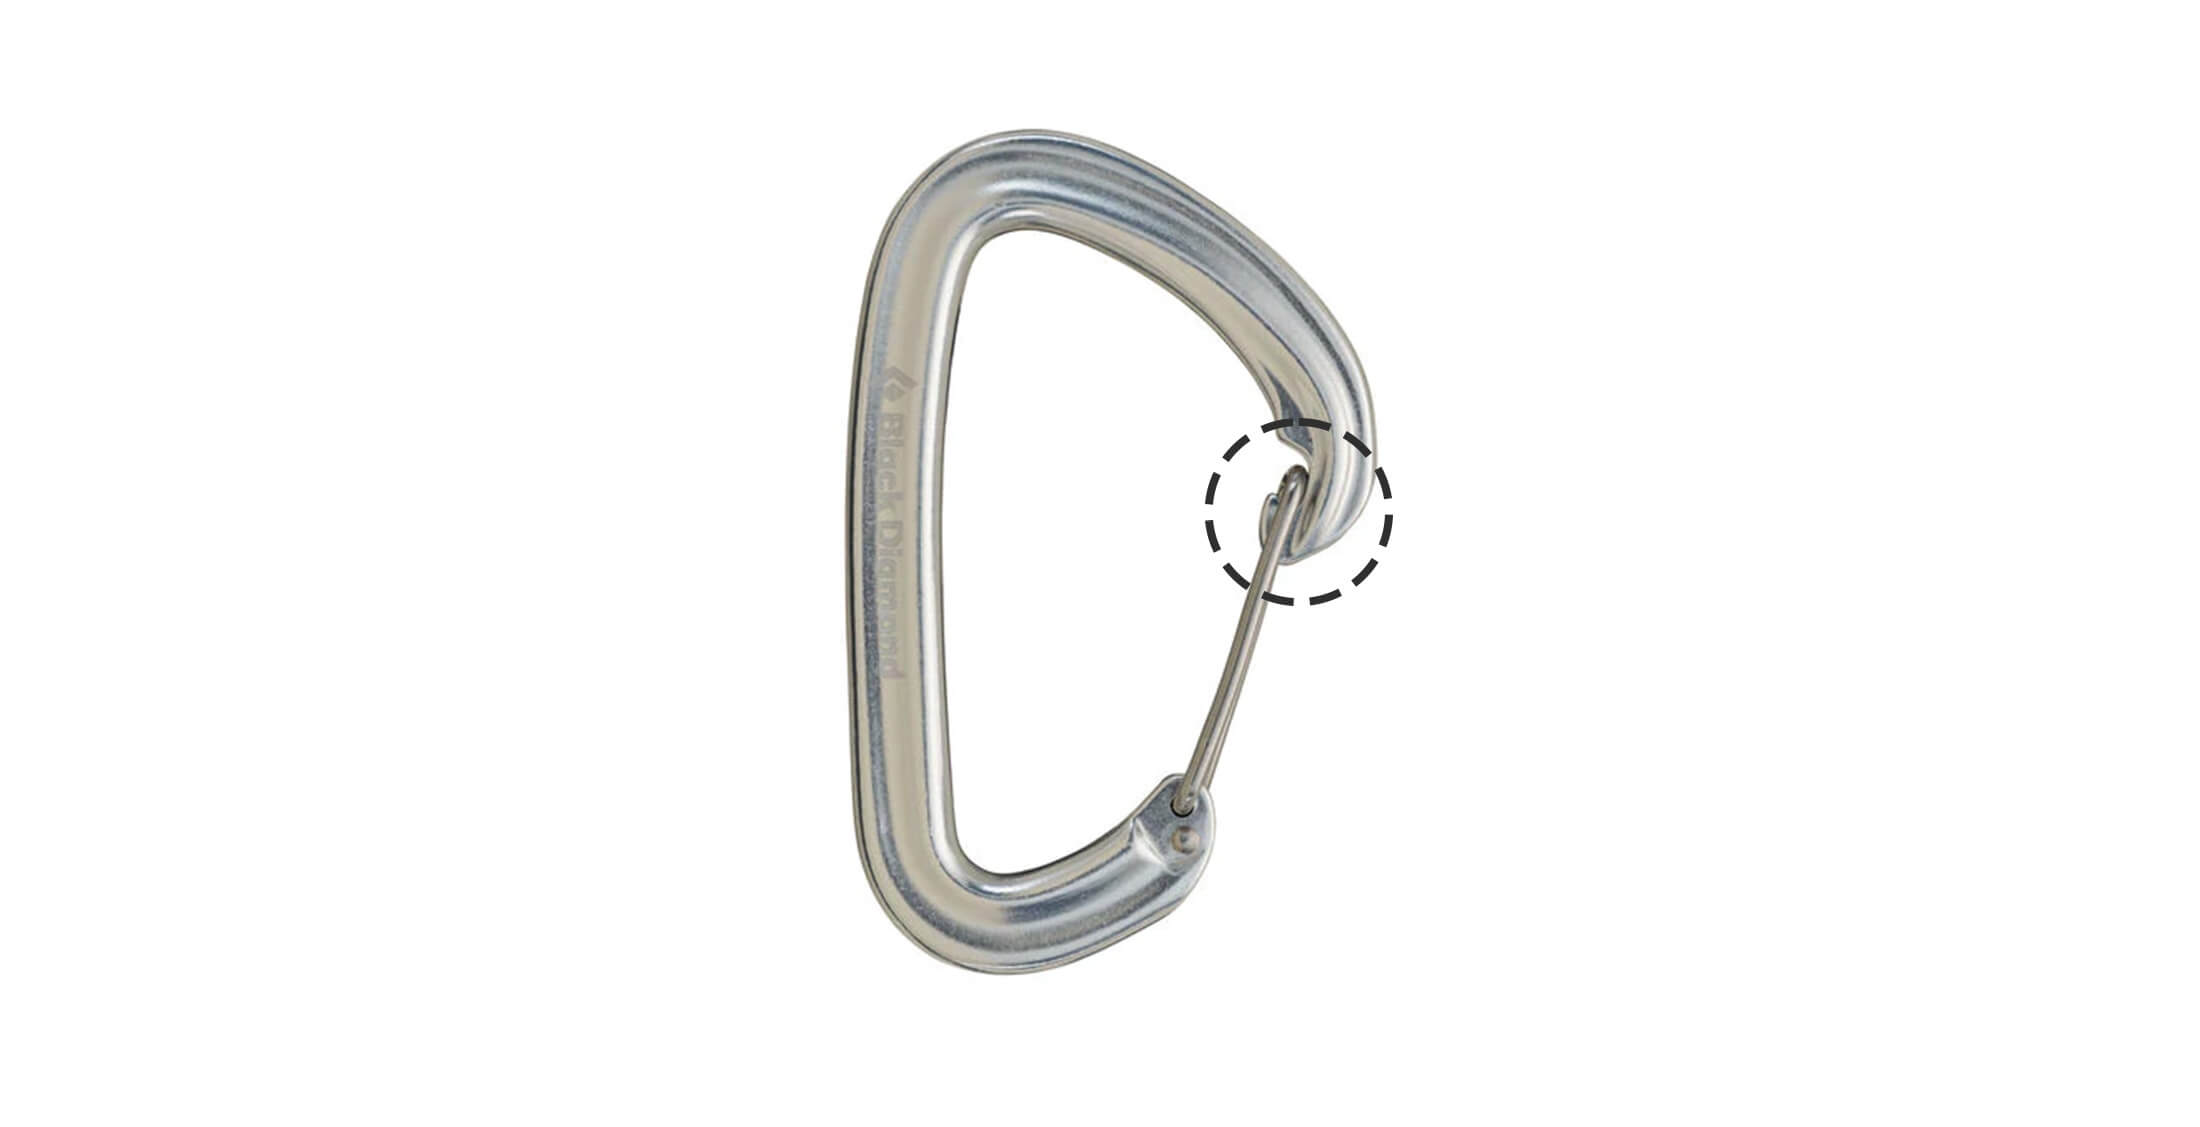 notched carabiners nose